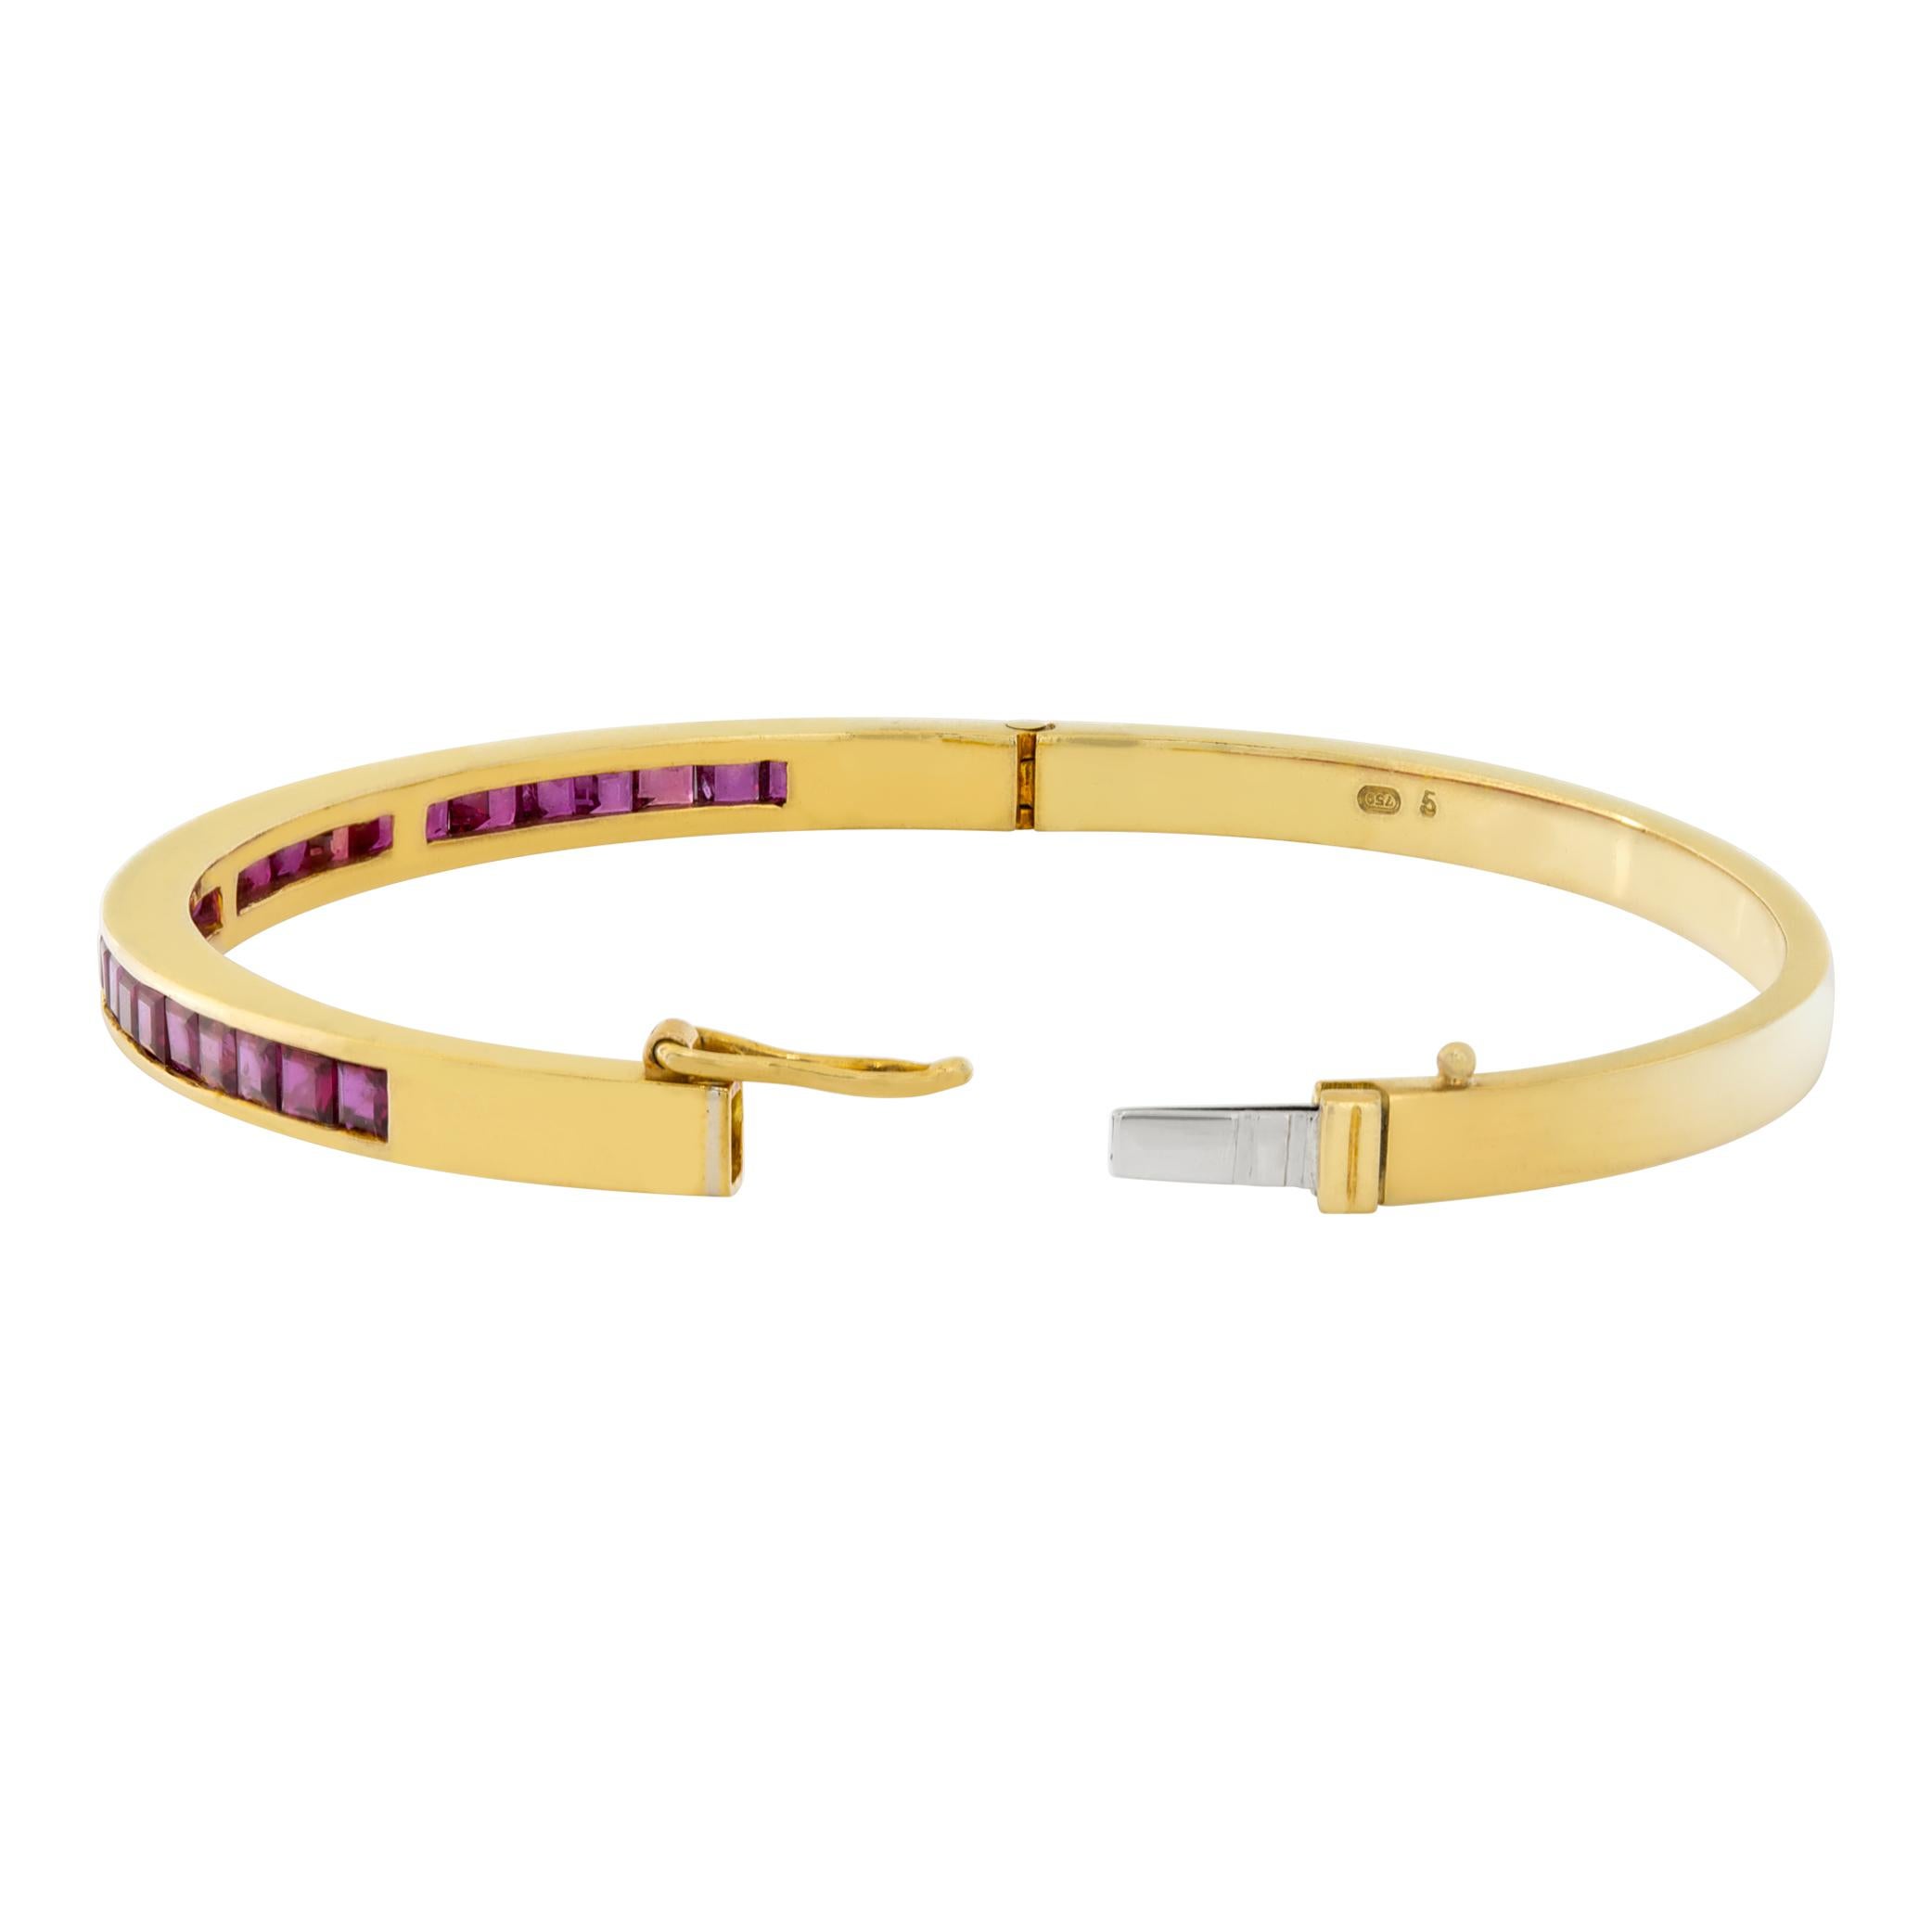 Ruby 18k yellow gold bangle In Excellent Condition For Sale In Surfside, FL